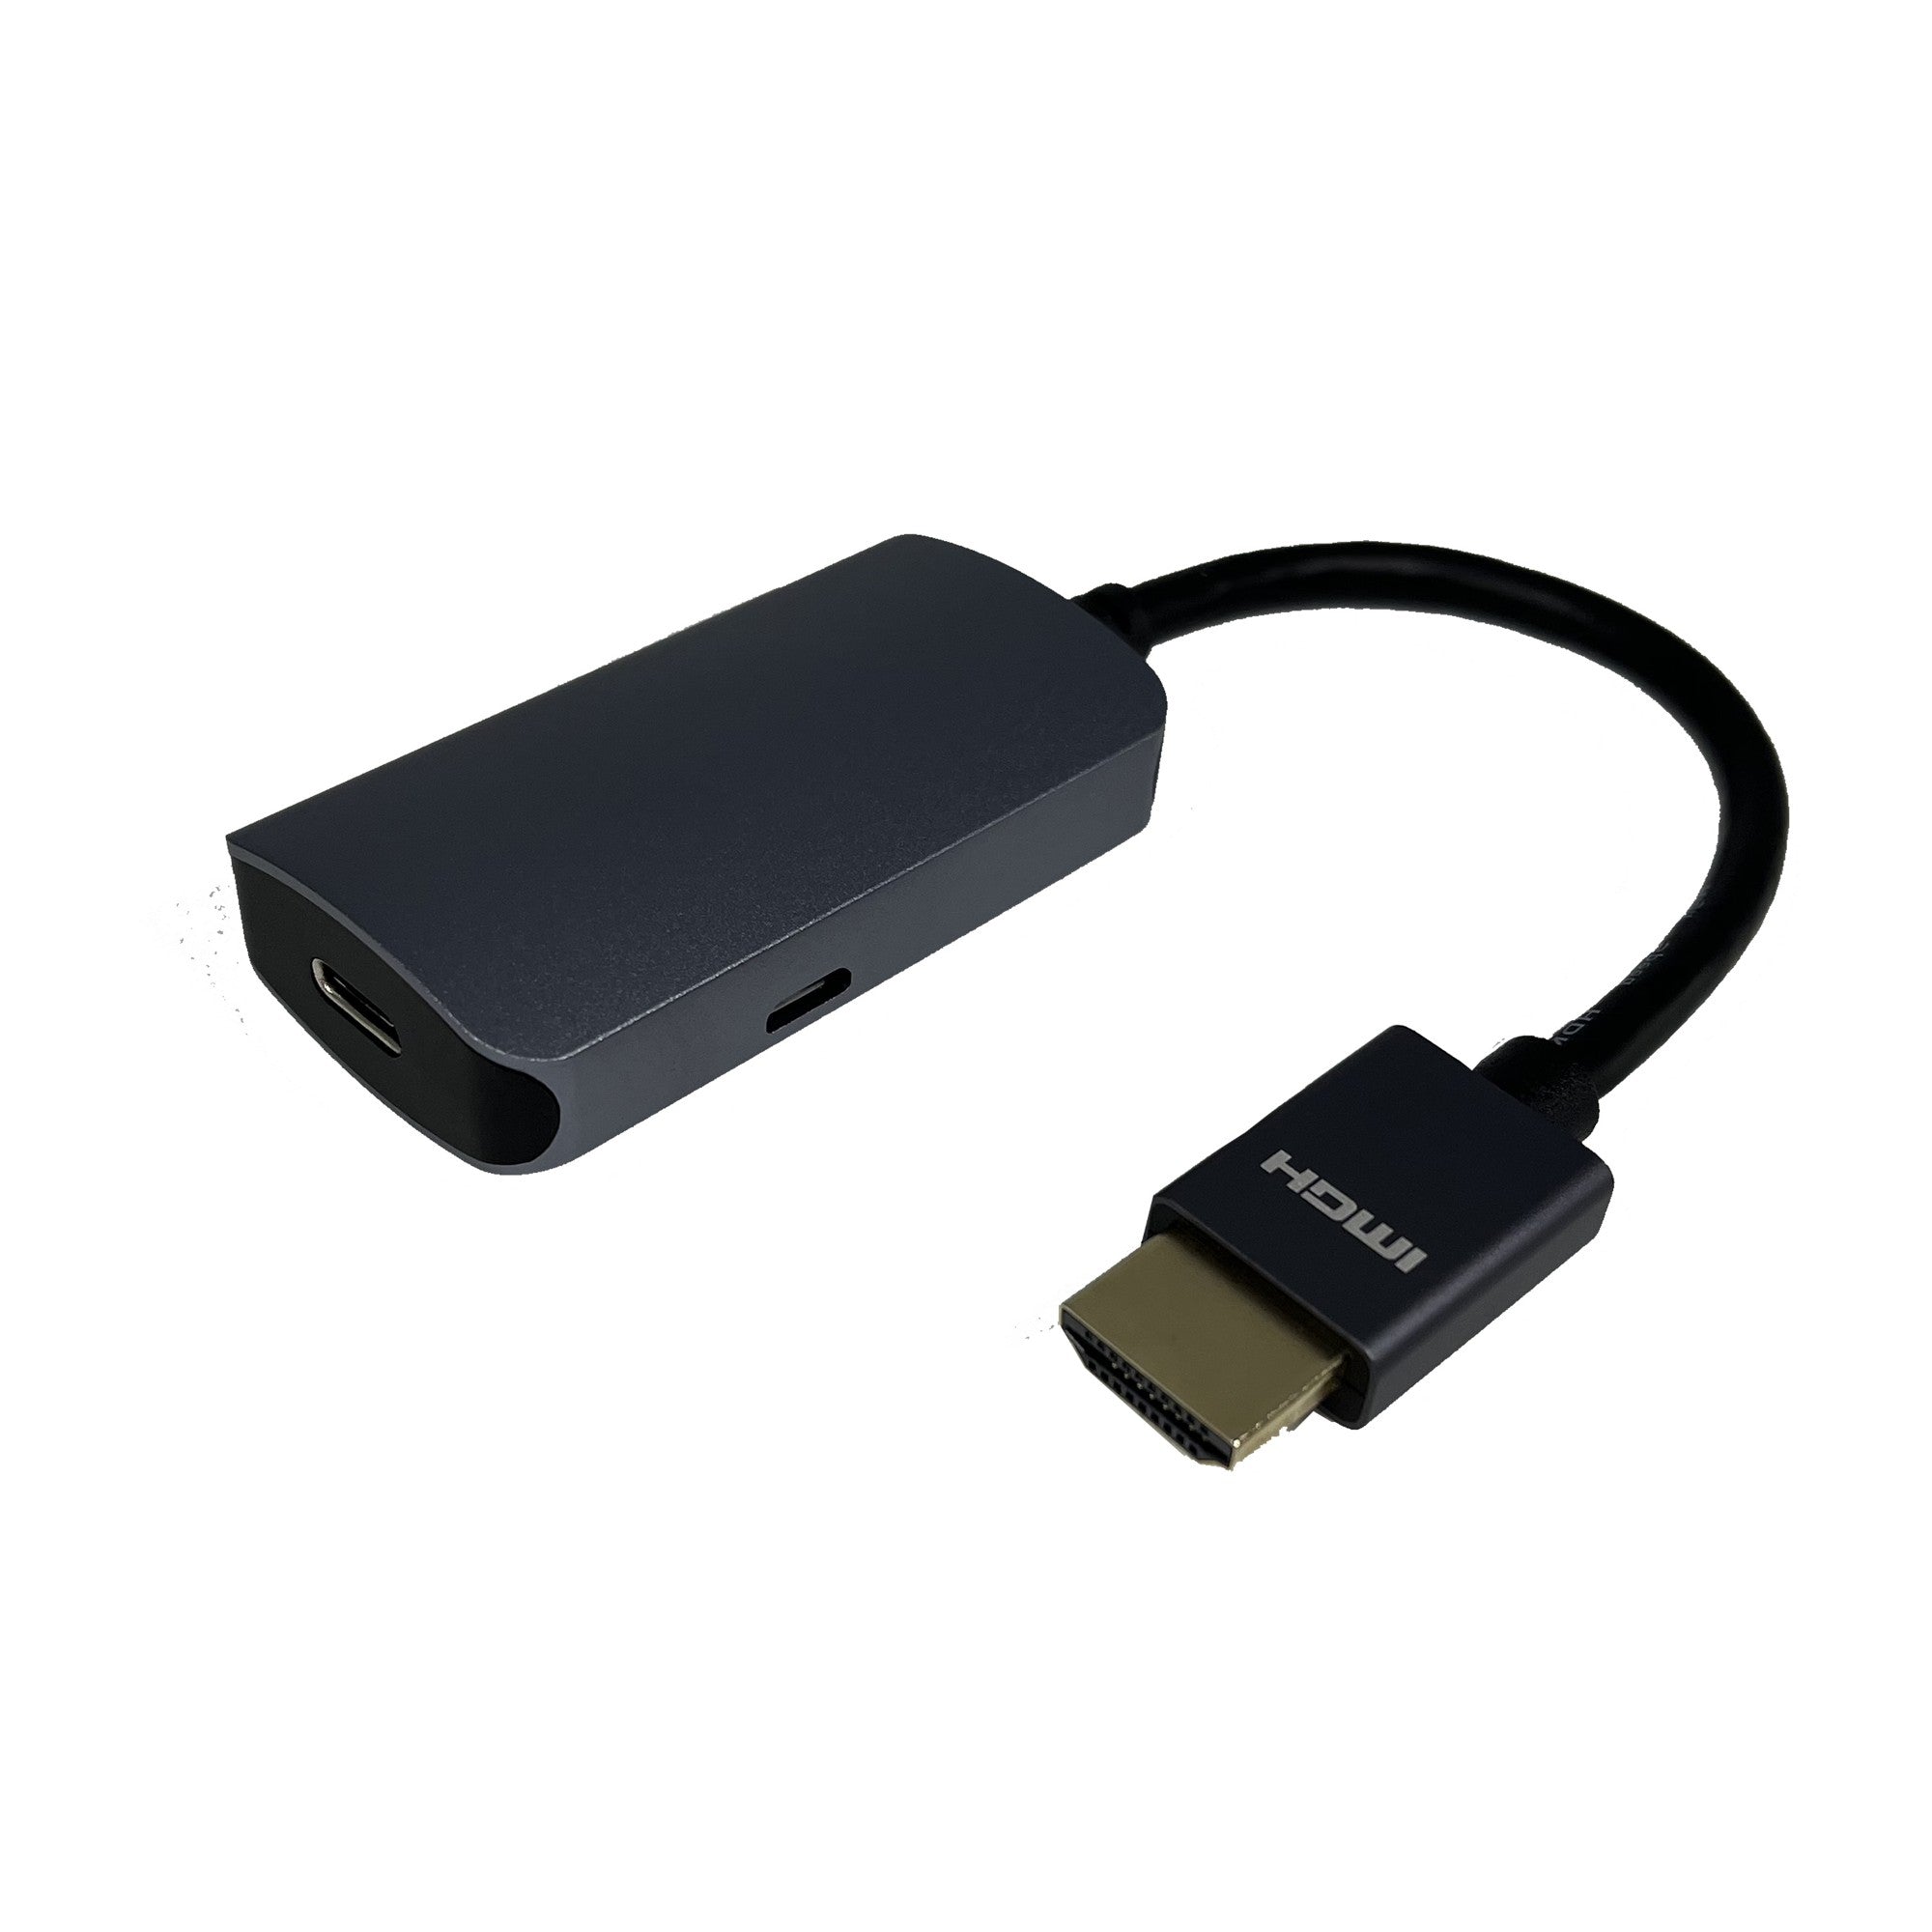 HDMI to USB C Active 4K Adapter - Male to Female